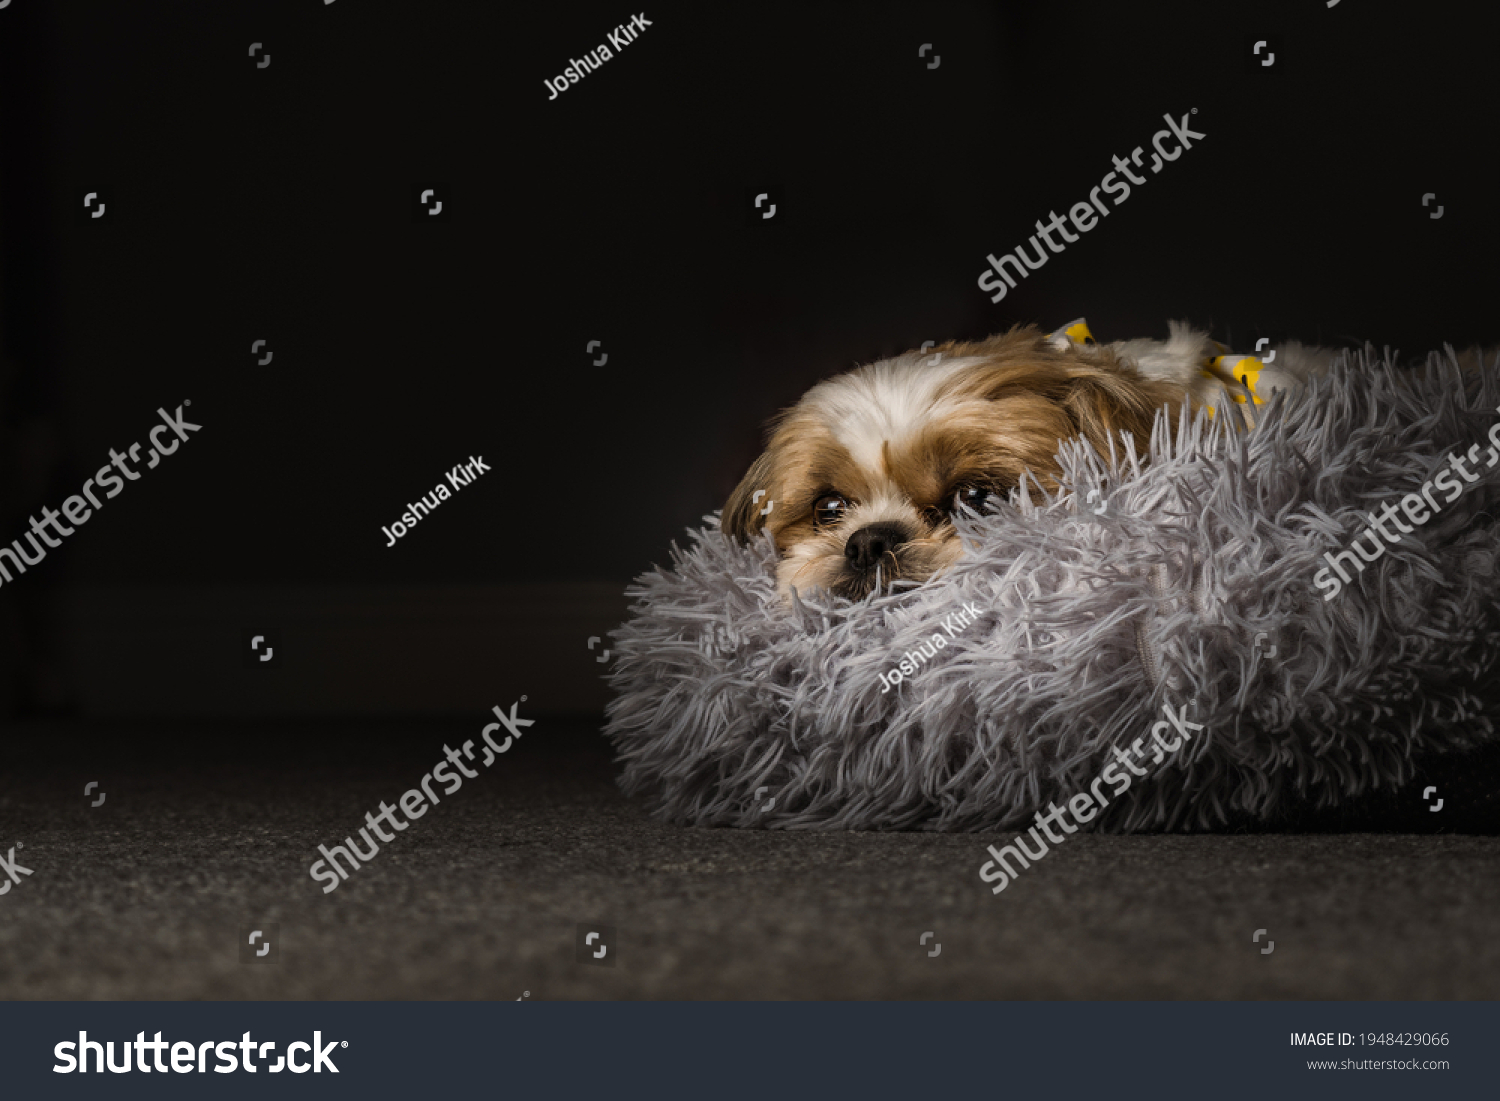 pet shih tzu in dog bed looking cute and fluffy with flower collar neckerchief bandana  #1948429066